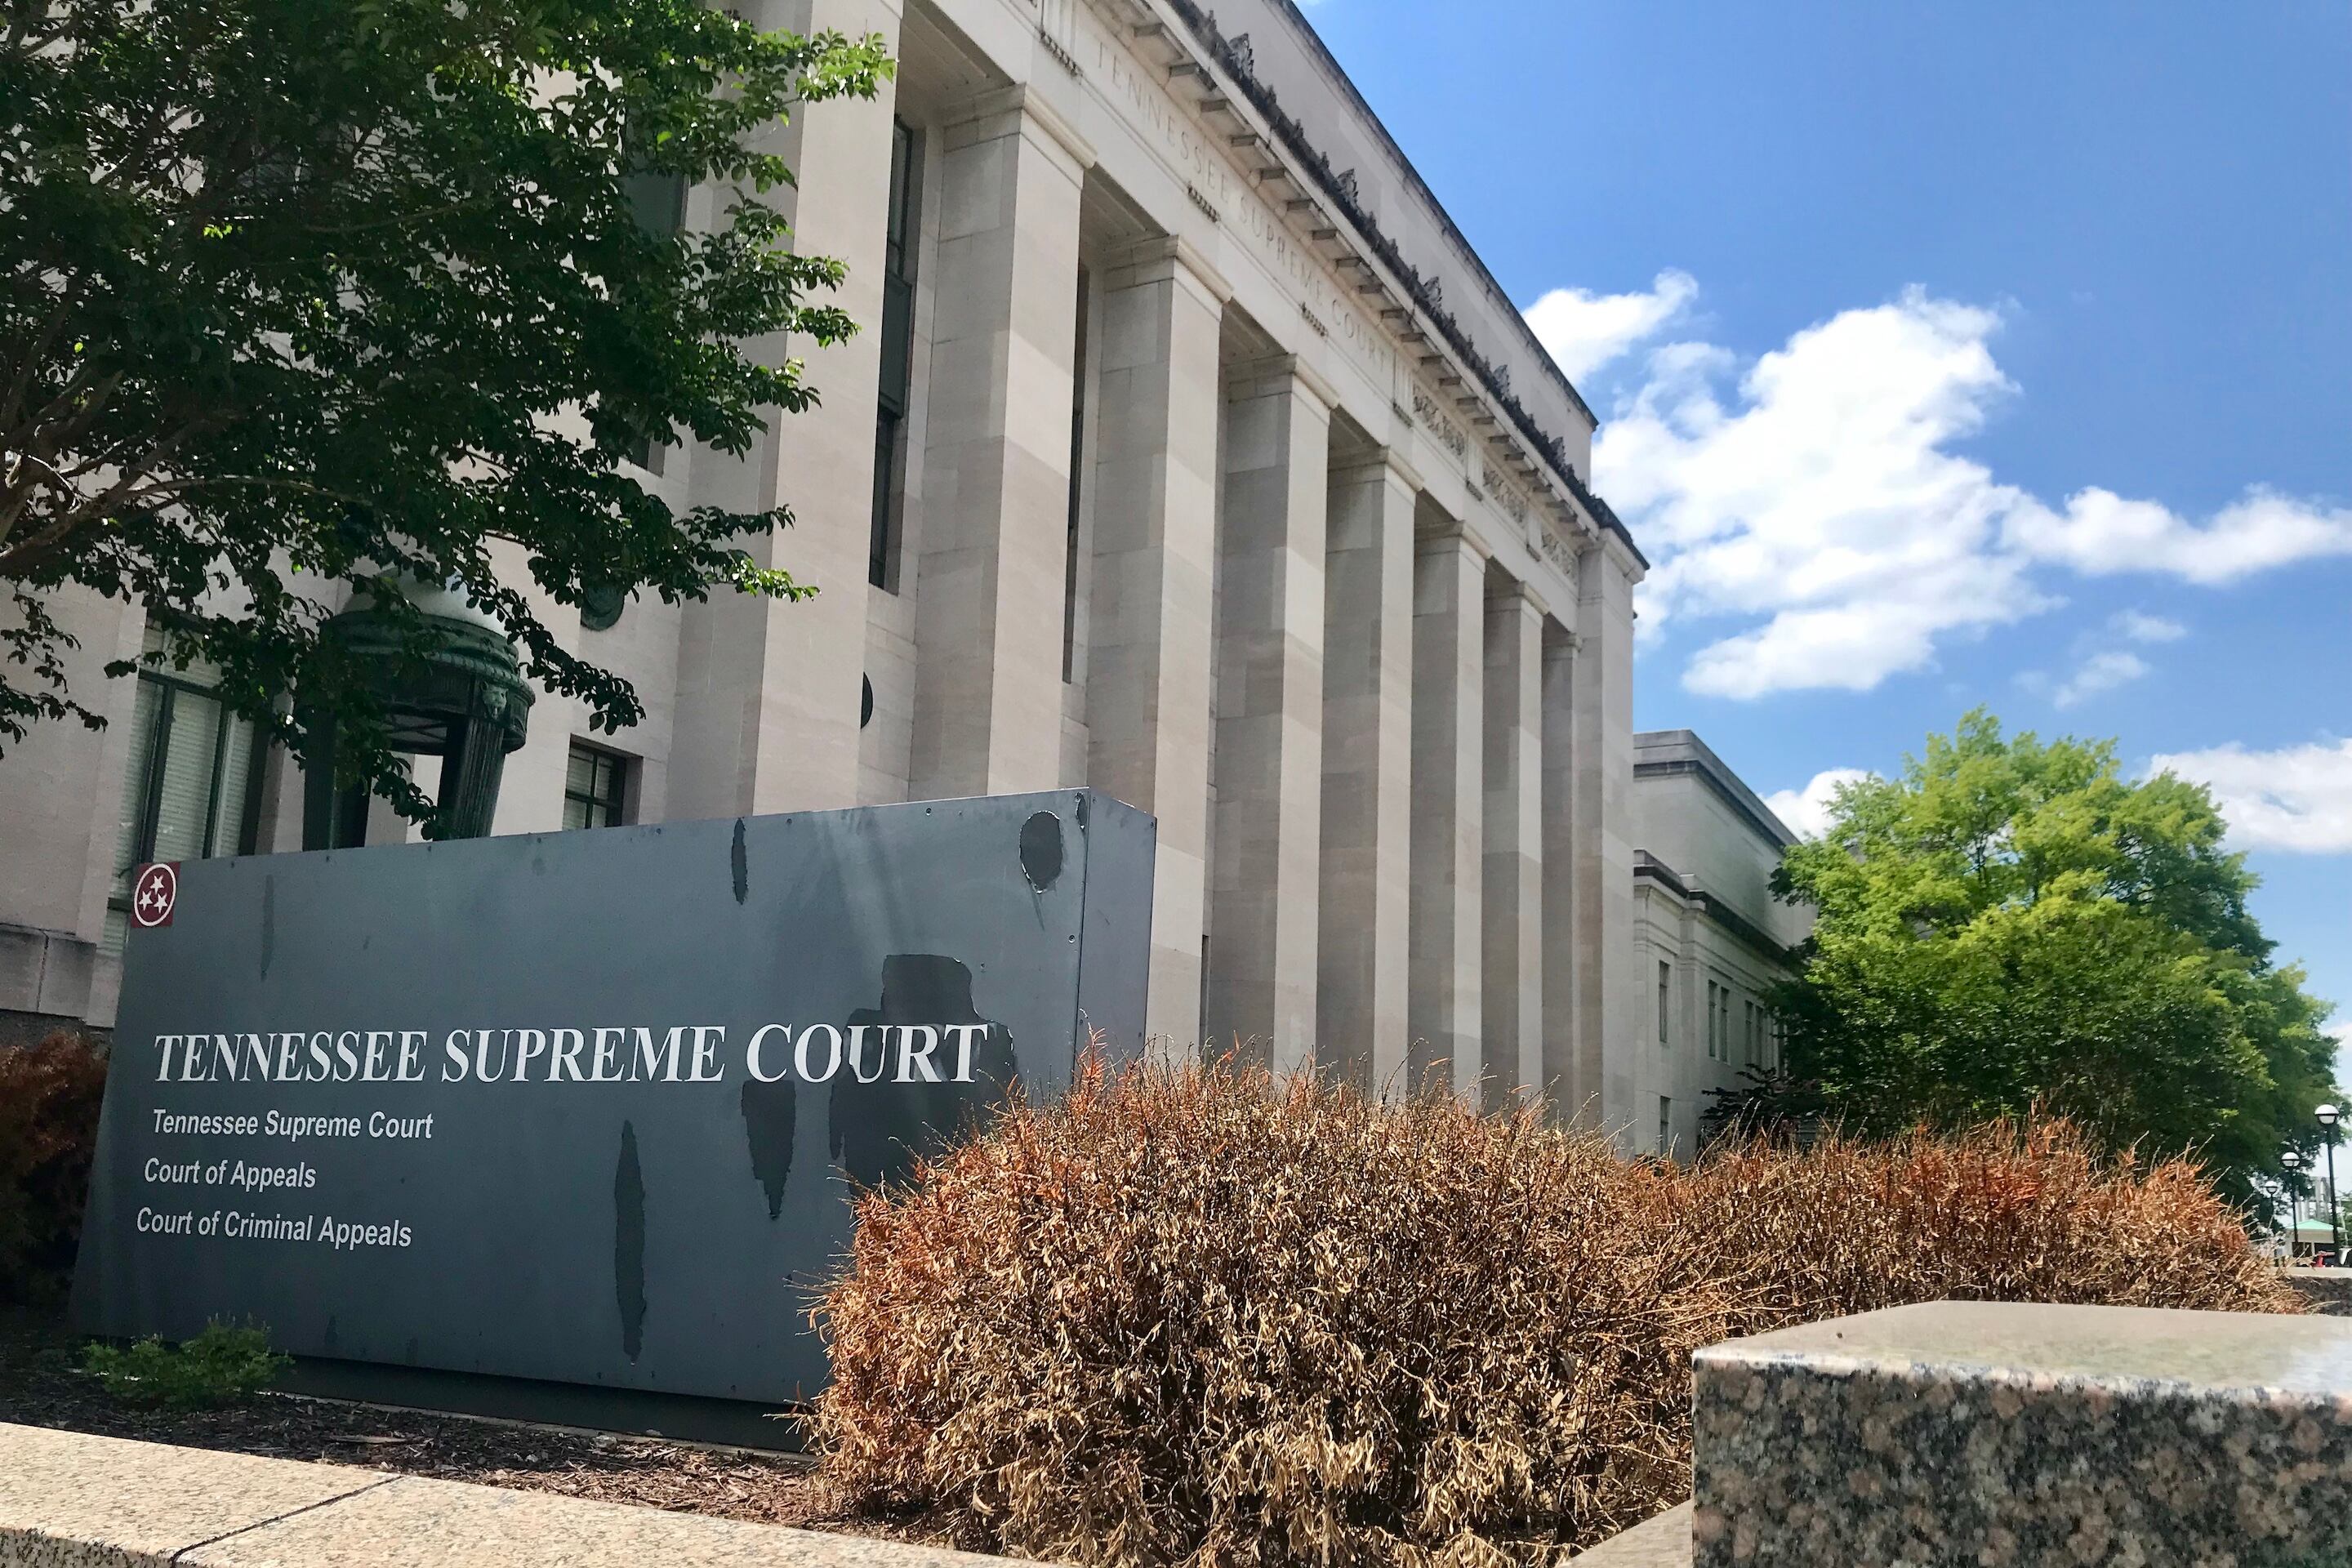 A large, multi-columned stone building set against a bright blue sky. A sign in front of the building identifies it as the Tennessee Supreme Court.